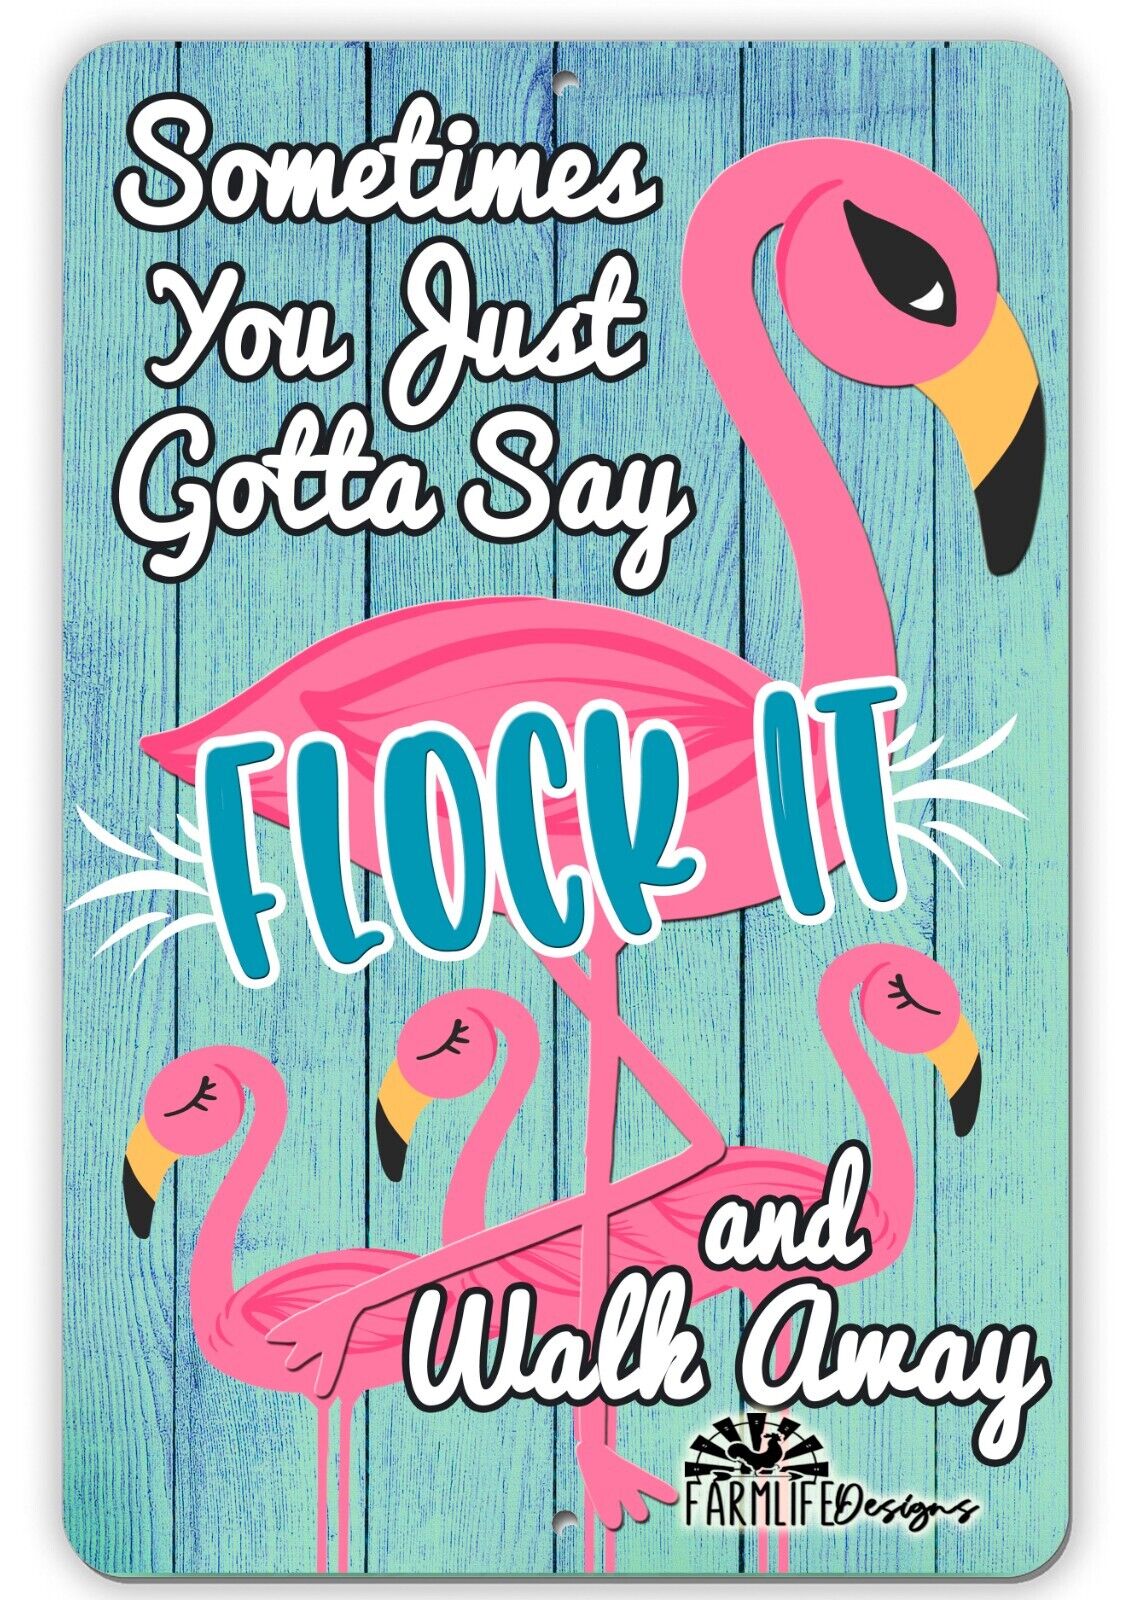 Crazy Flamingo Sign, You Just Got to Say Flock IT and walk away, 8x12 handmade